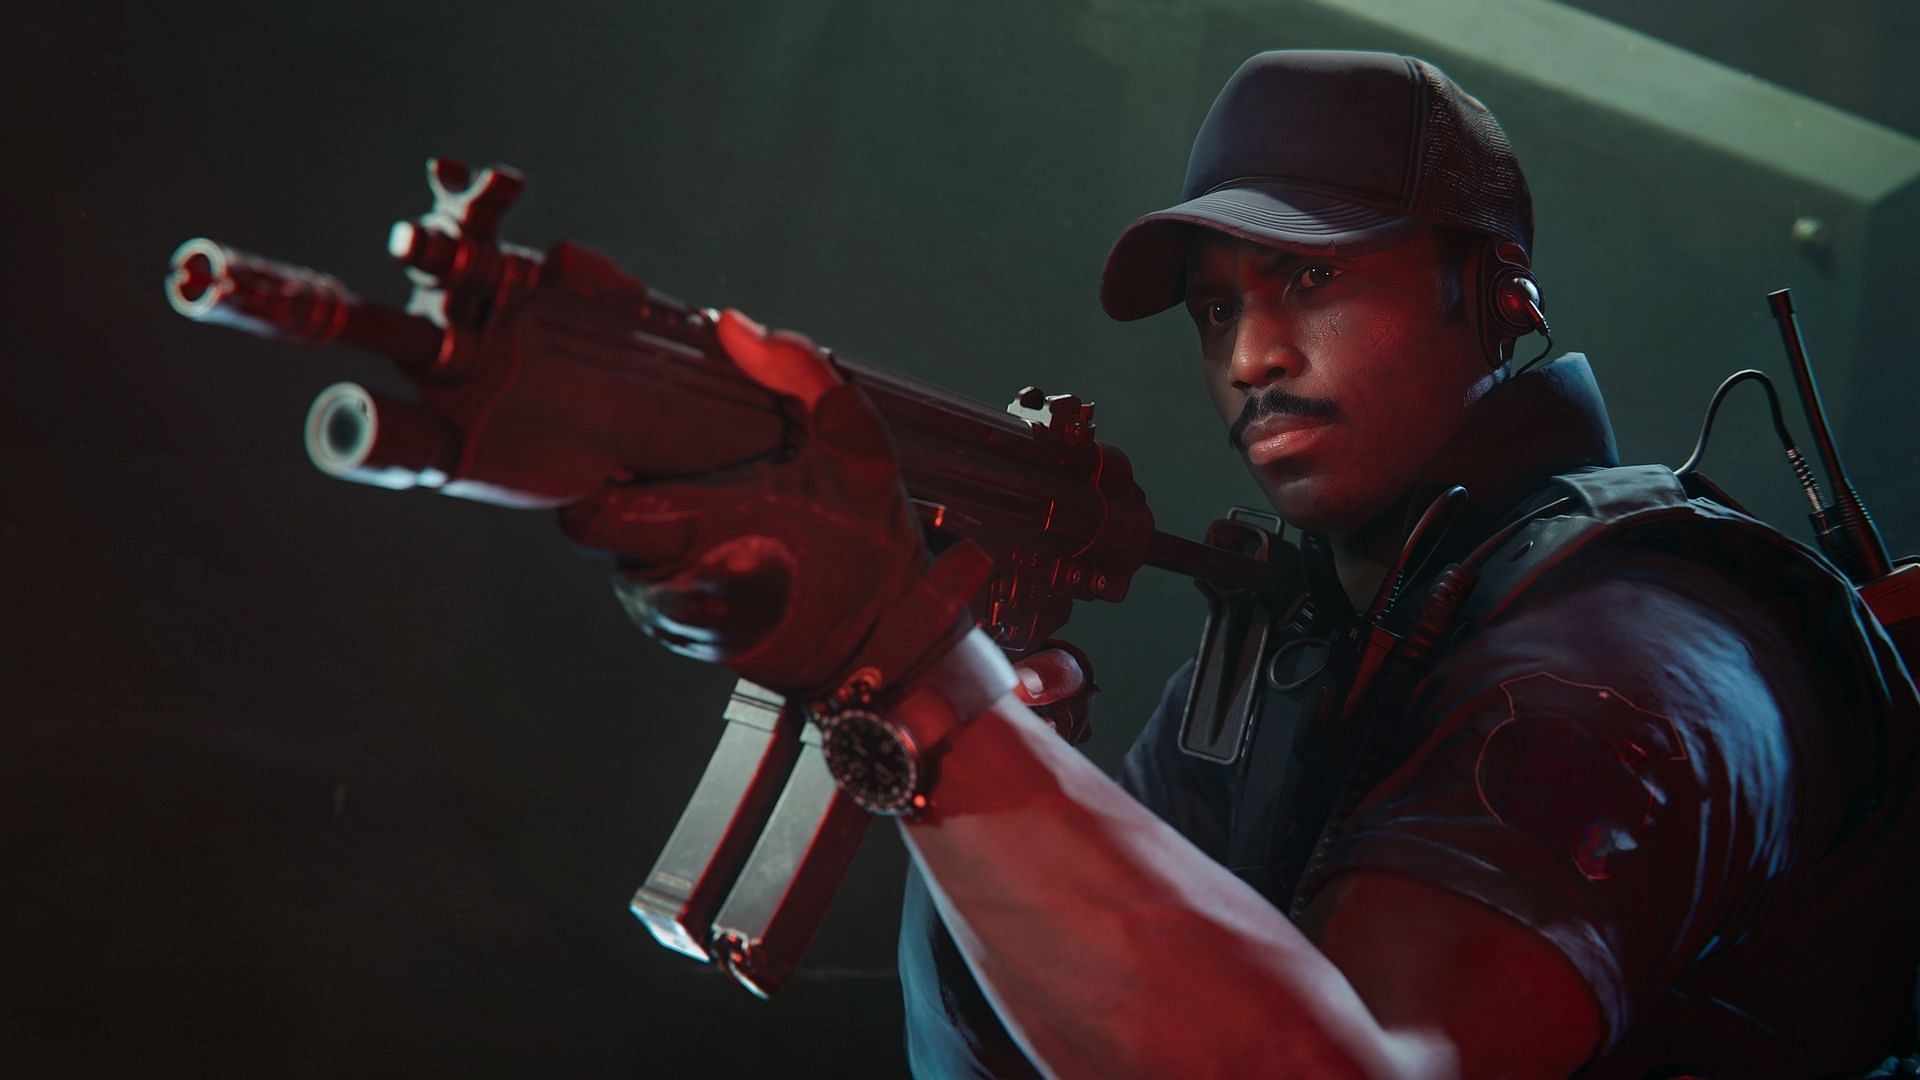 An Operator in Black Ops 6 holding an SMG